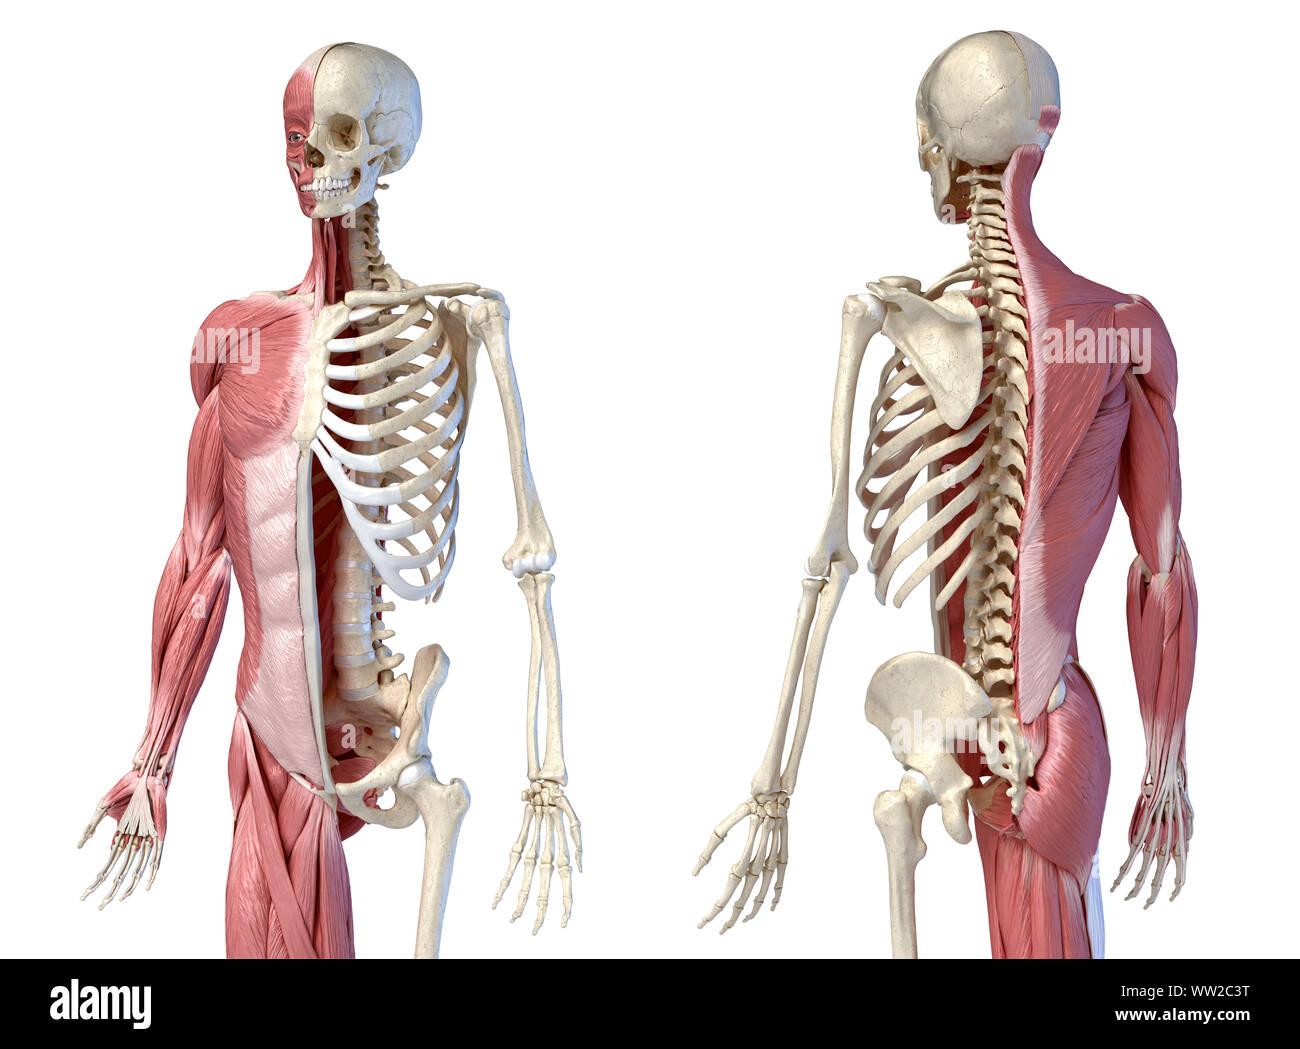 Human male anatomy, 3/4 figure muscular and skeletal systems, front and back perspective views. on white background. 3d anatomy illustration. Stock Photo